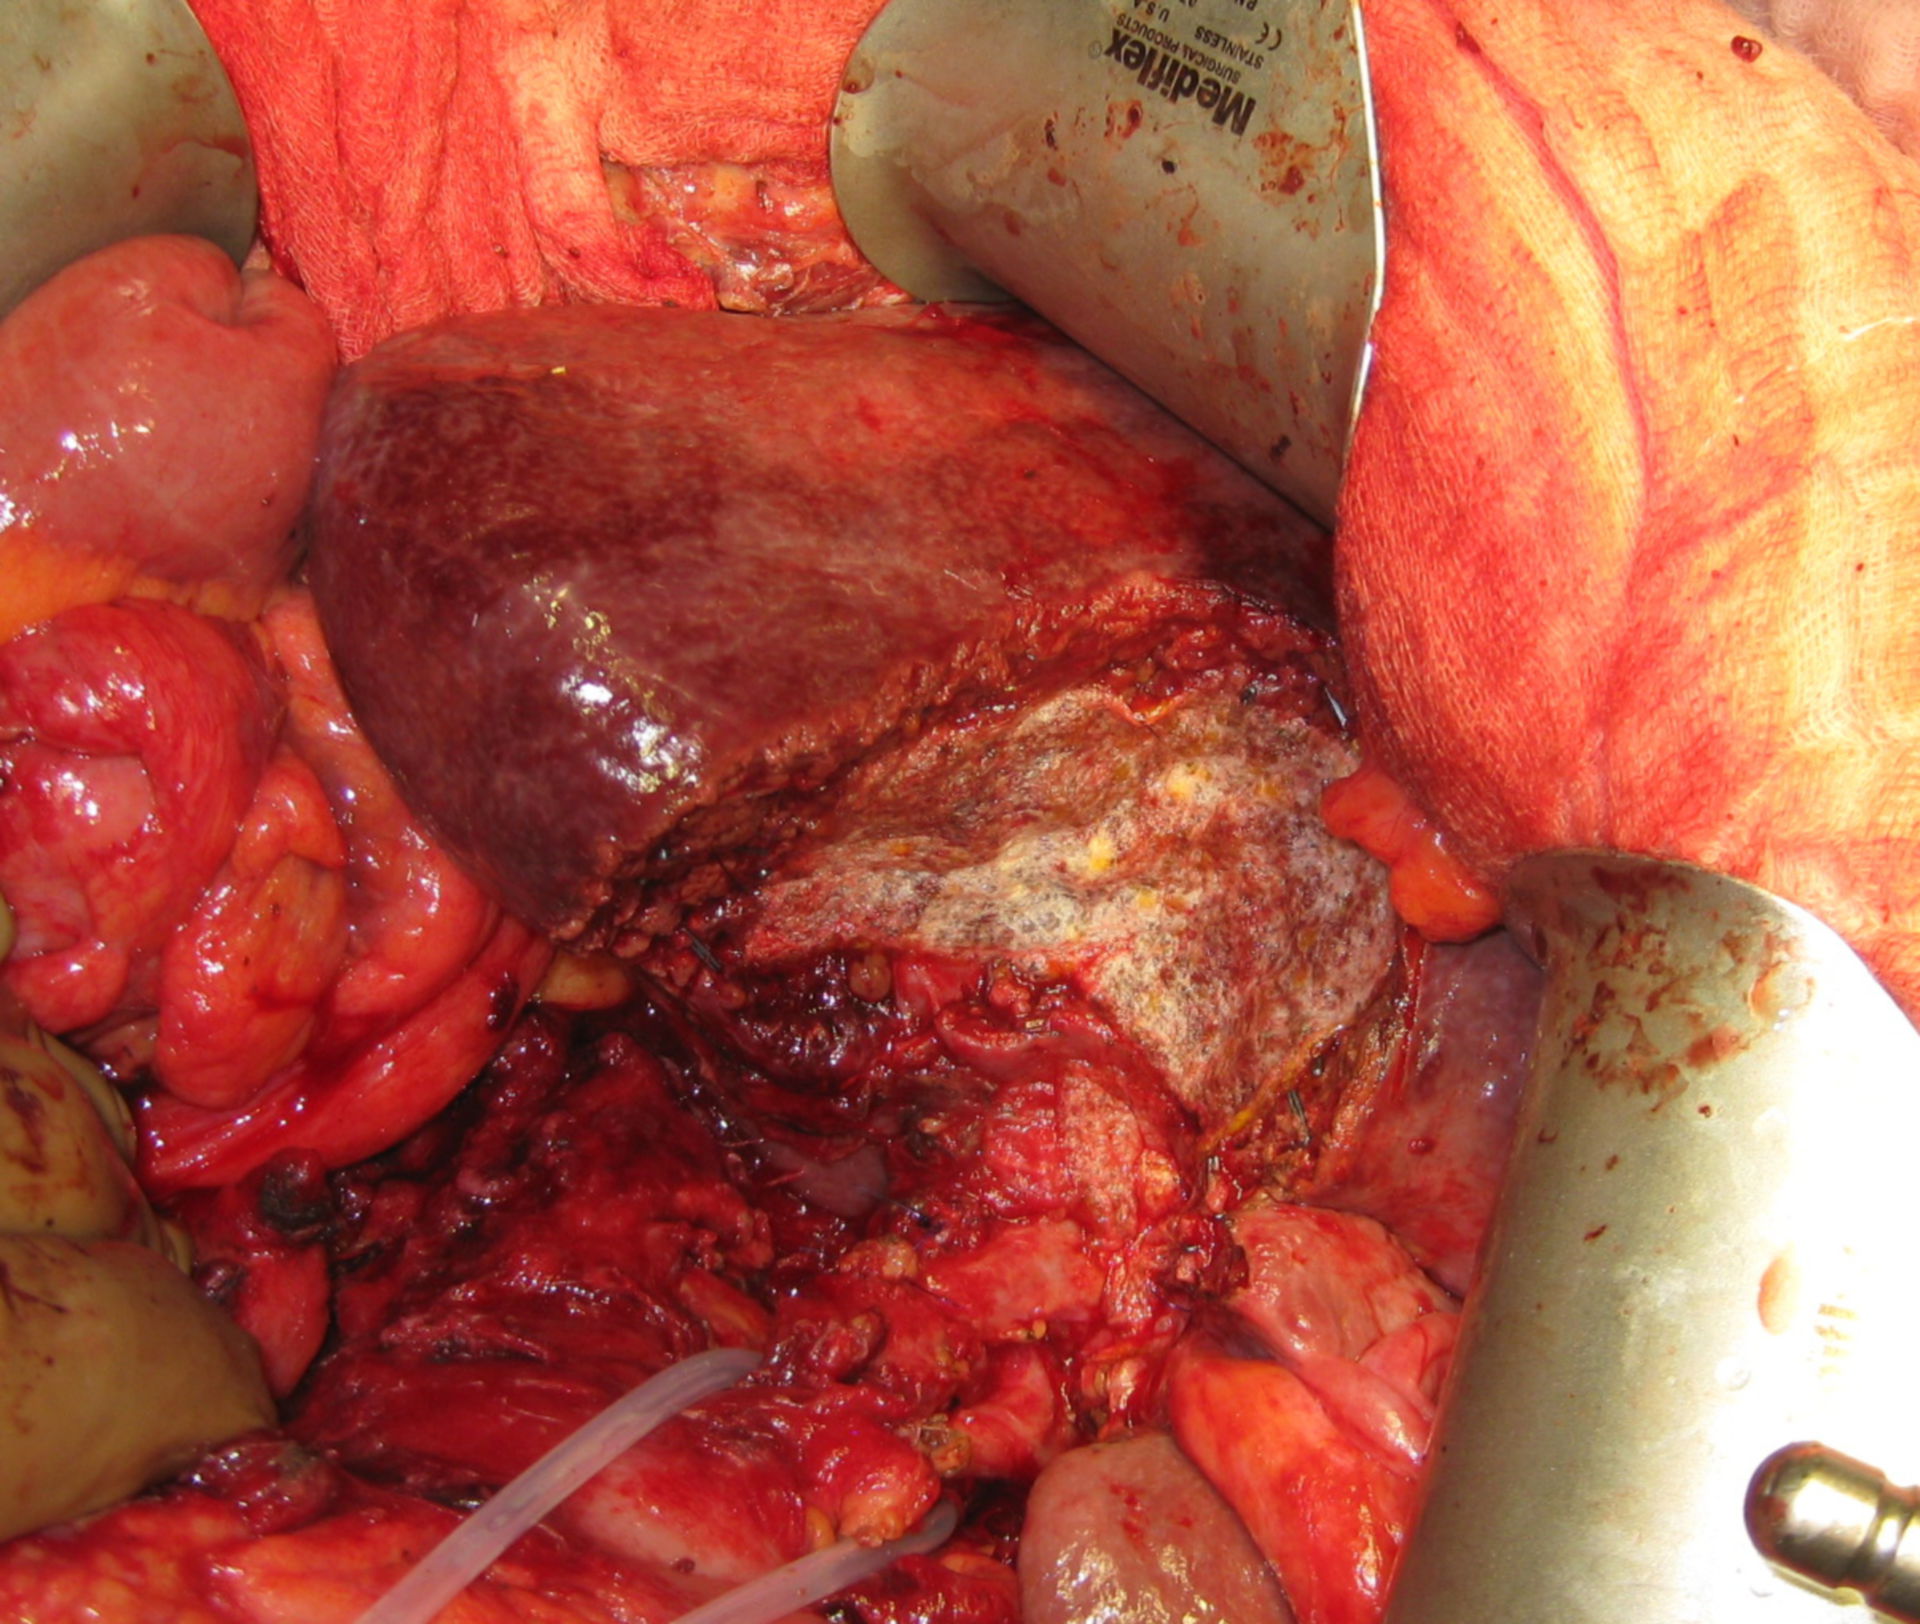 Partial liver resection because of a carcinoma of the gall bladder